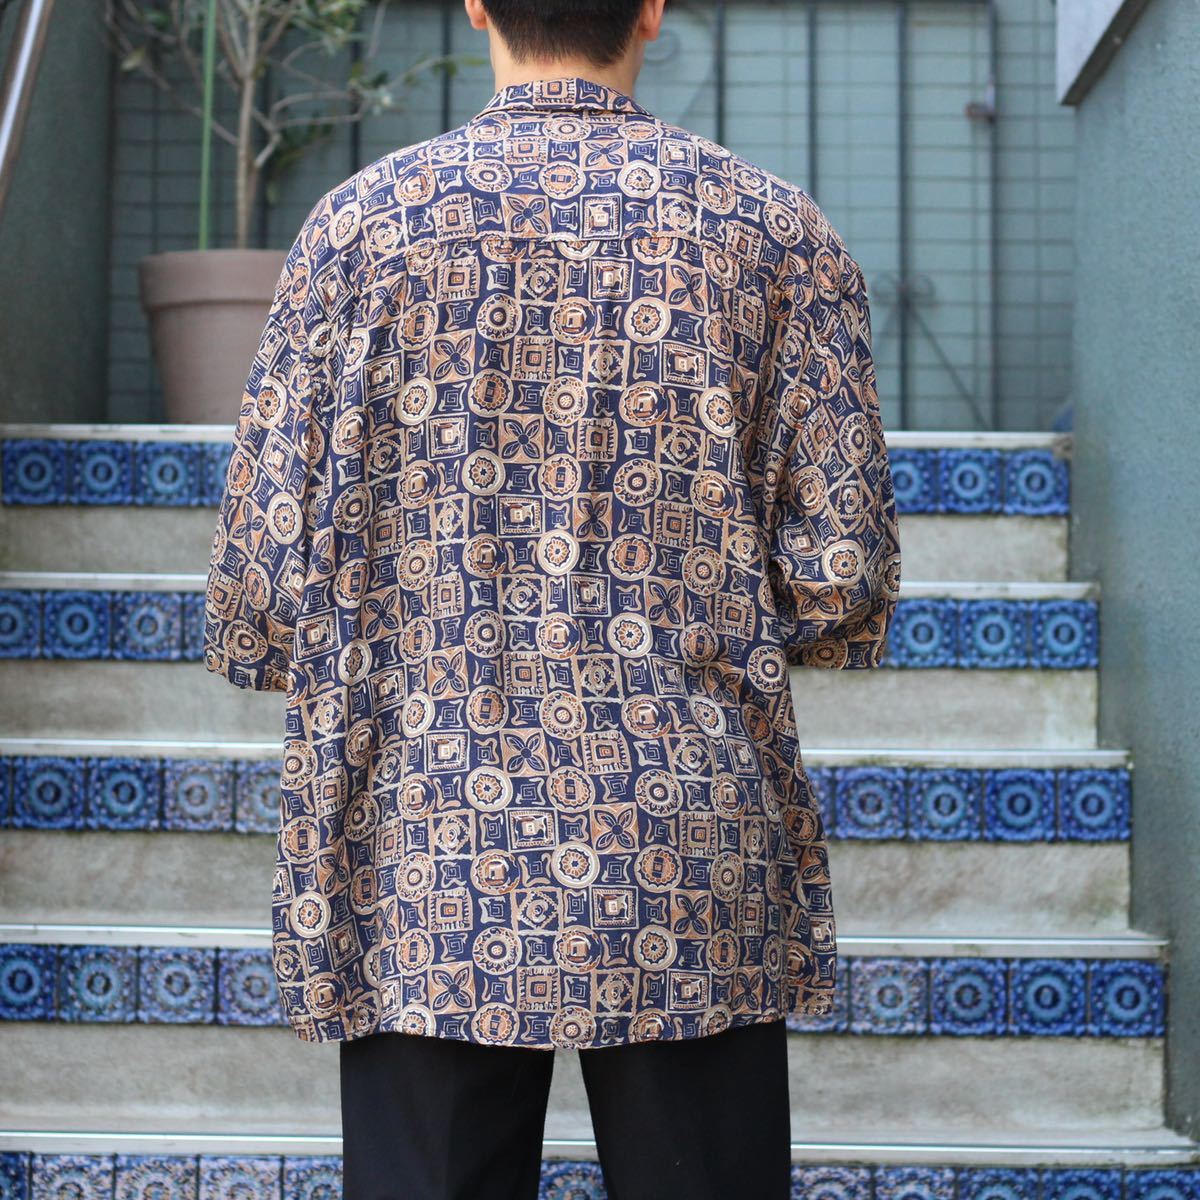 USA VINTAGE HALF SLEEVE PATTERNED ALL OVER SHIRT/アメリカ古着半袖総柄シャツ_画像3